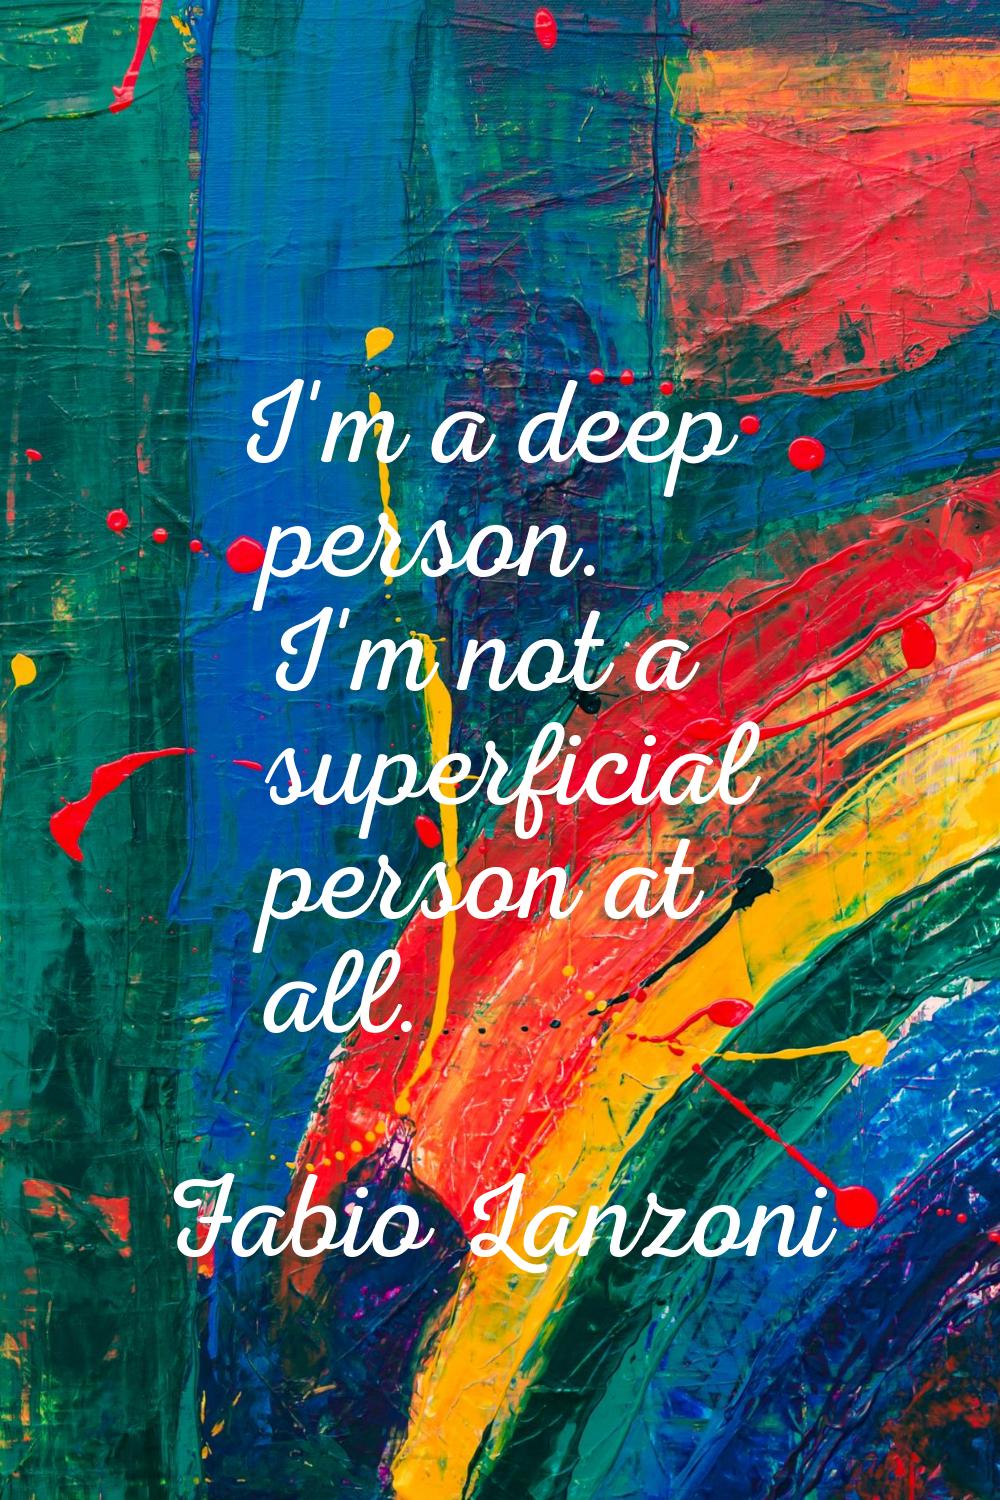 I'm a deep person. I'm not a superficial person at all.